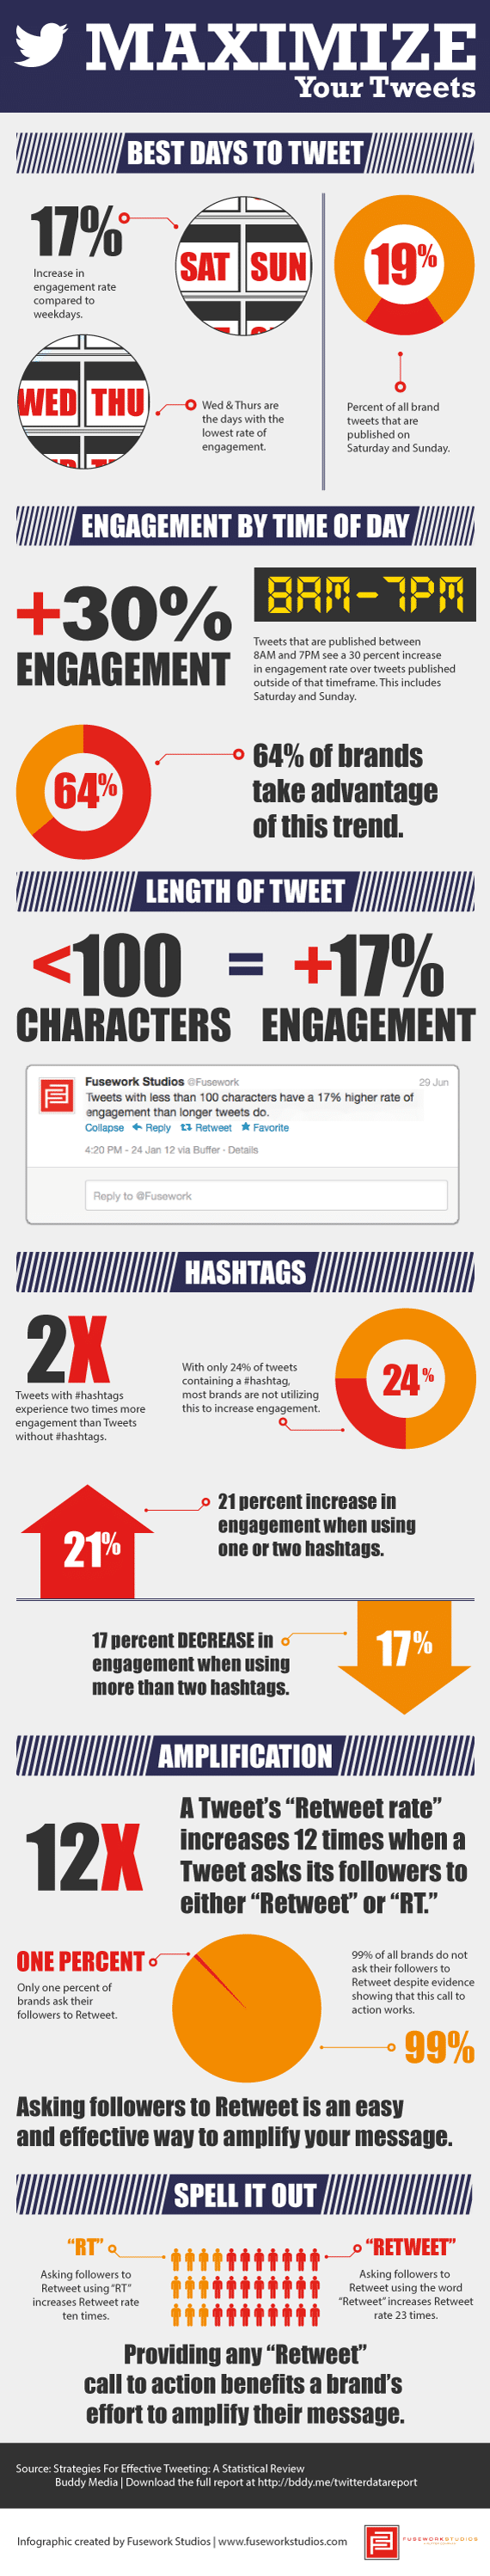 the-maximizing-your-tweets-infographic